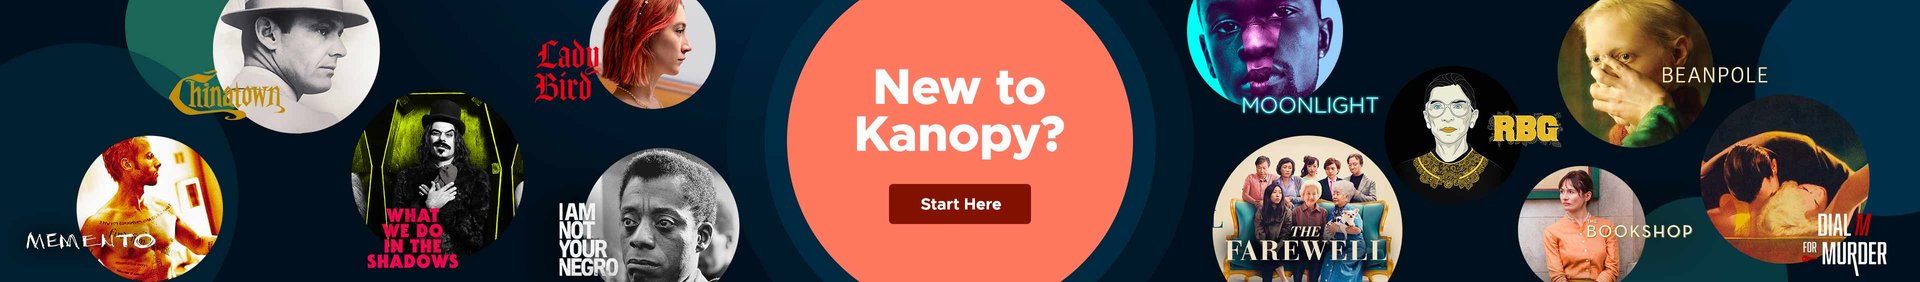 New to Kanopy text with movie stills